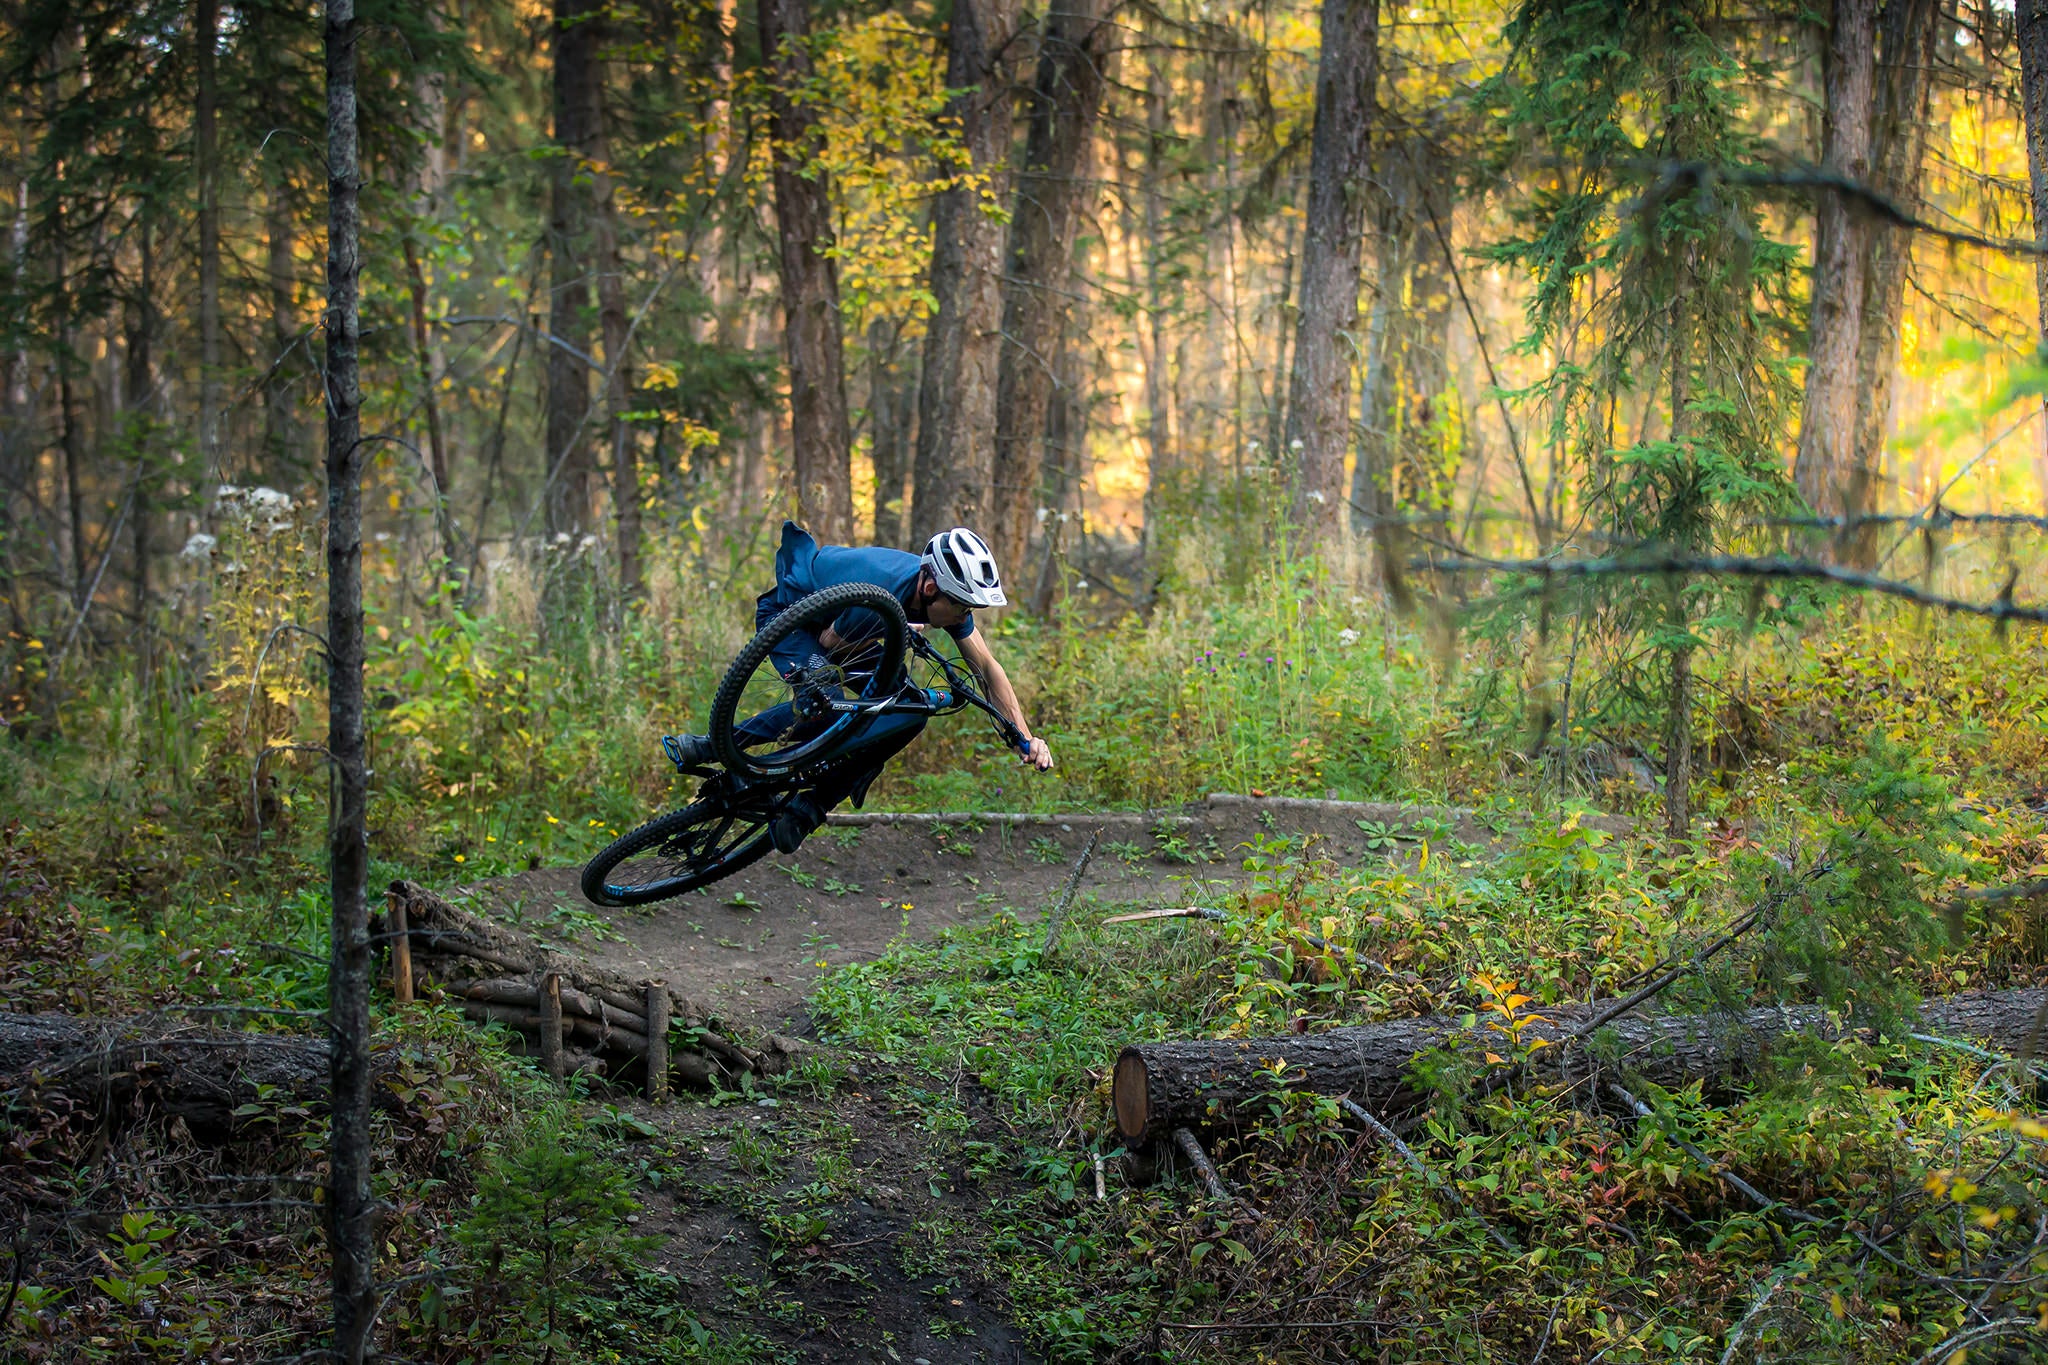 James Doerfling jumping his bicycle in the forest.